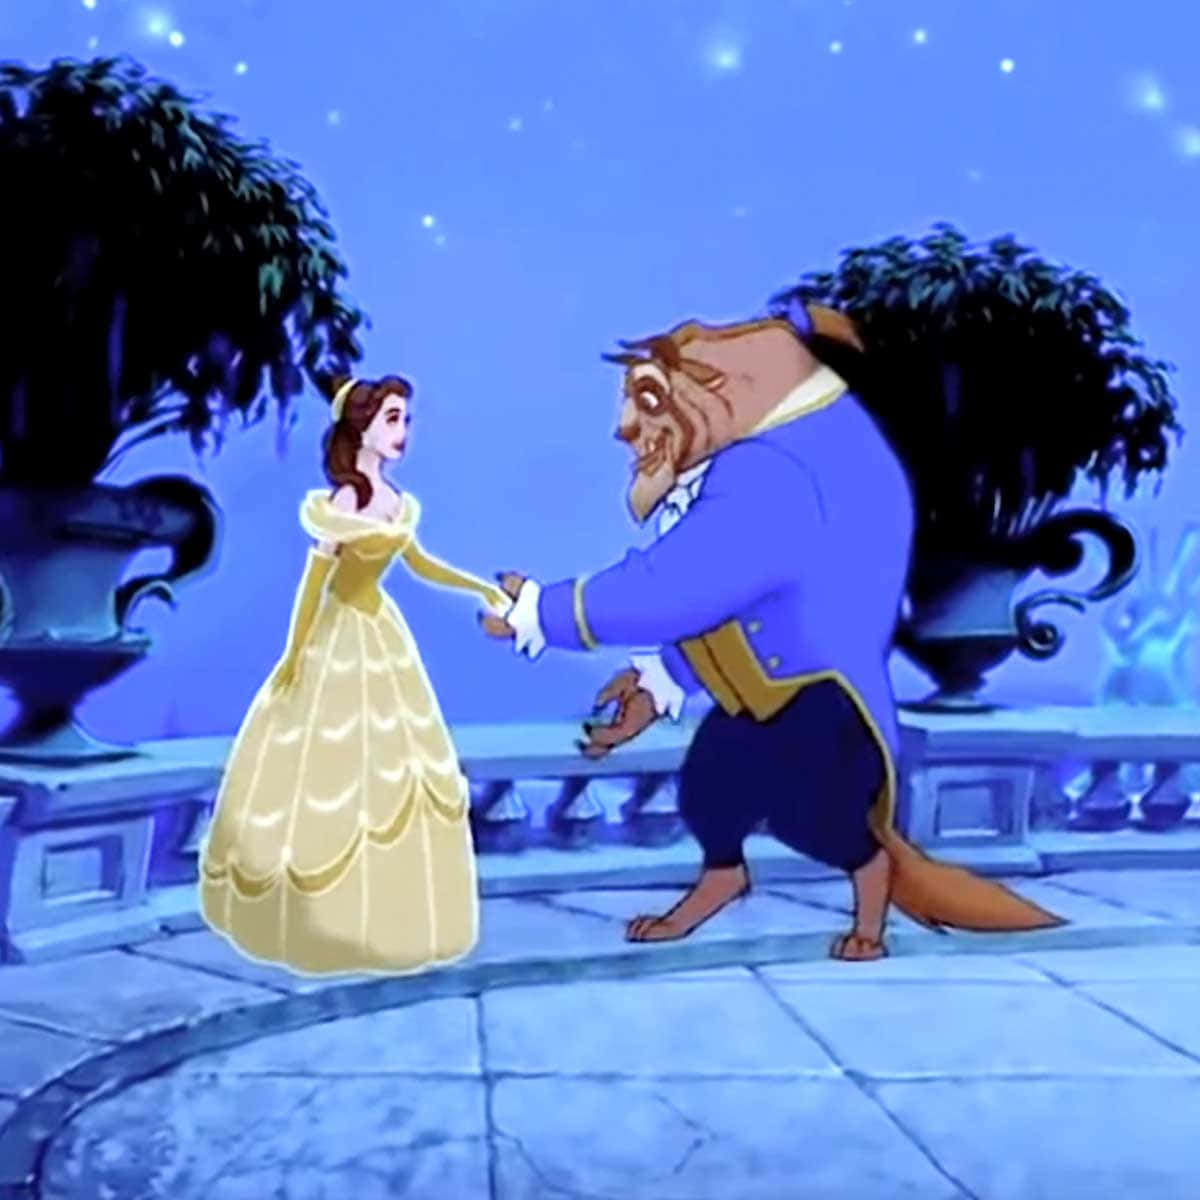 Magical love story between Beauty and The Beast